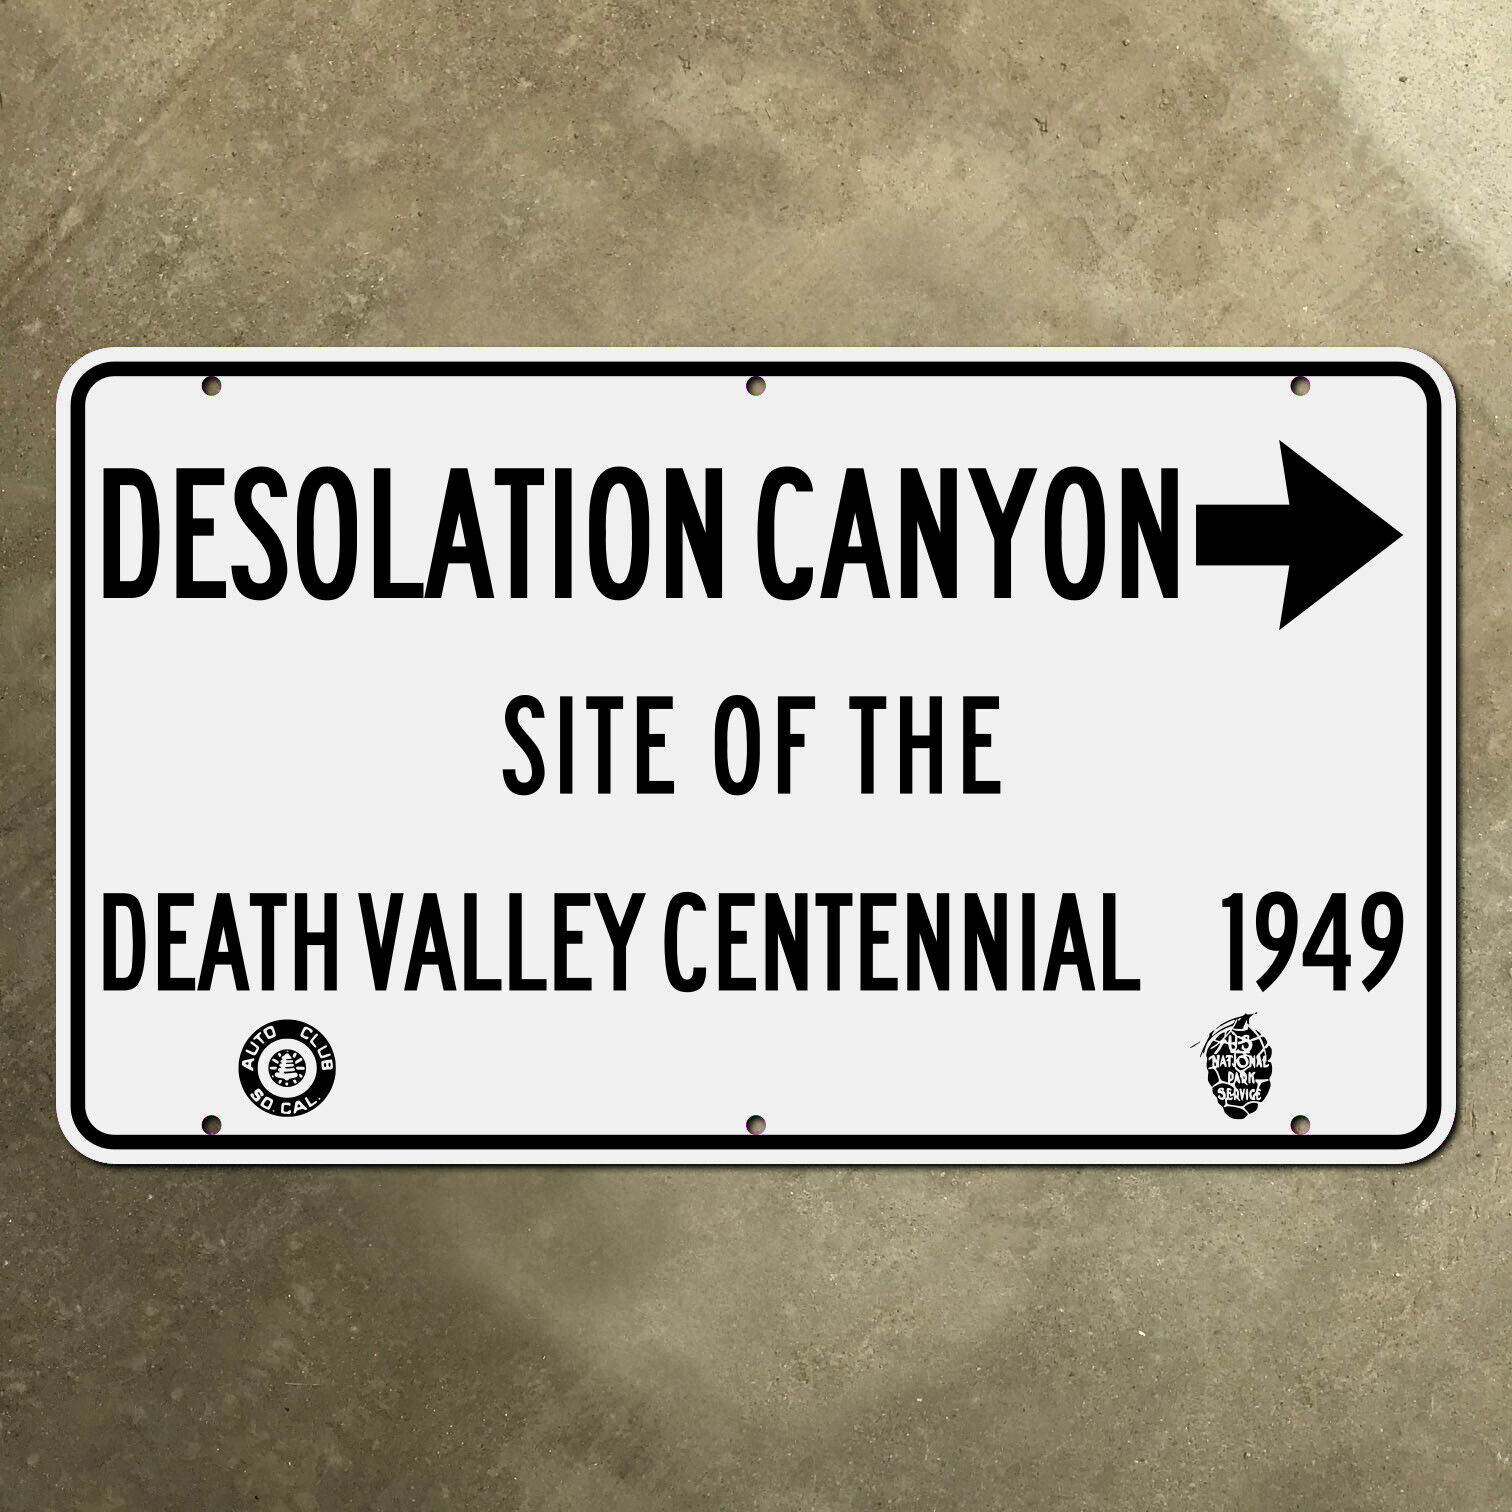 ACSC NPS Desolation Canyon highway sign Death Valley California 1949 49ers 36x21